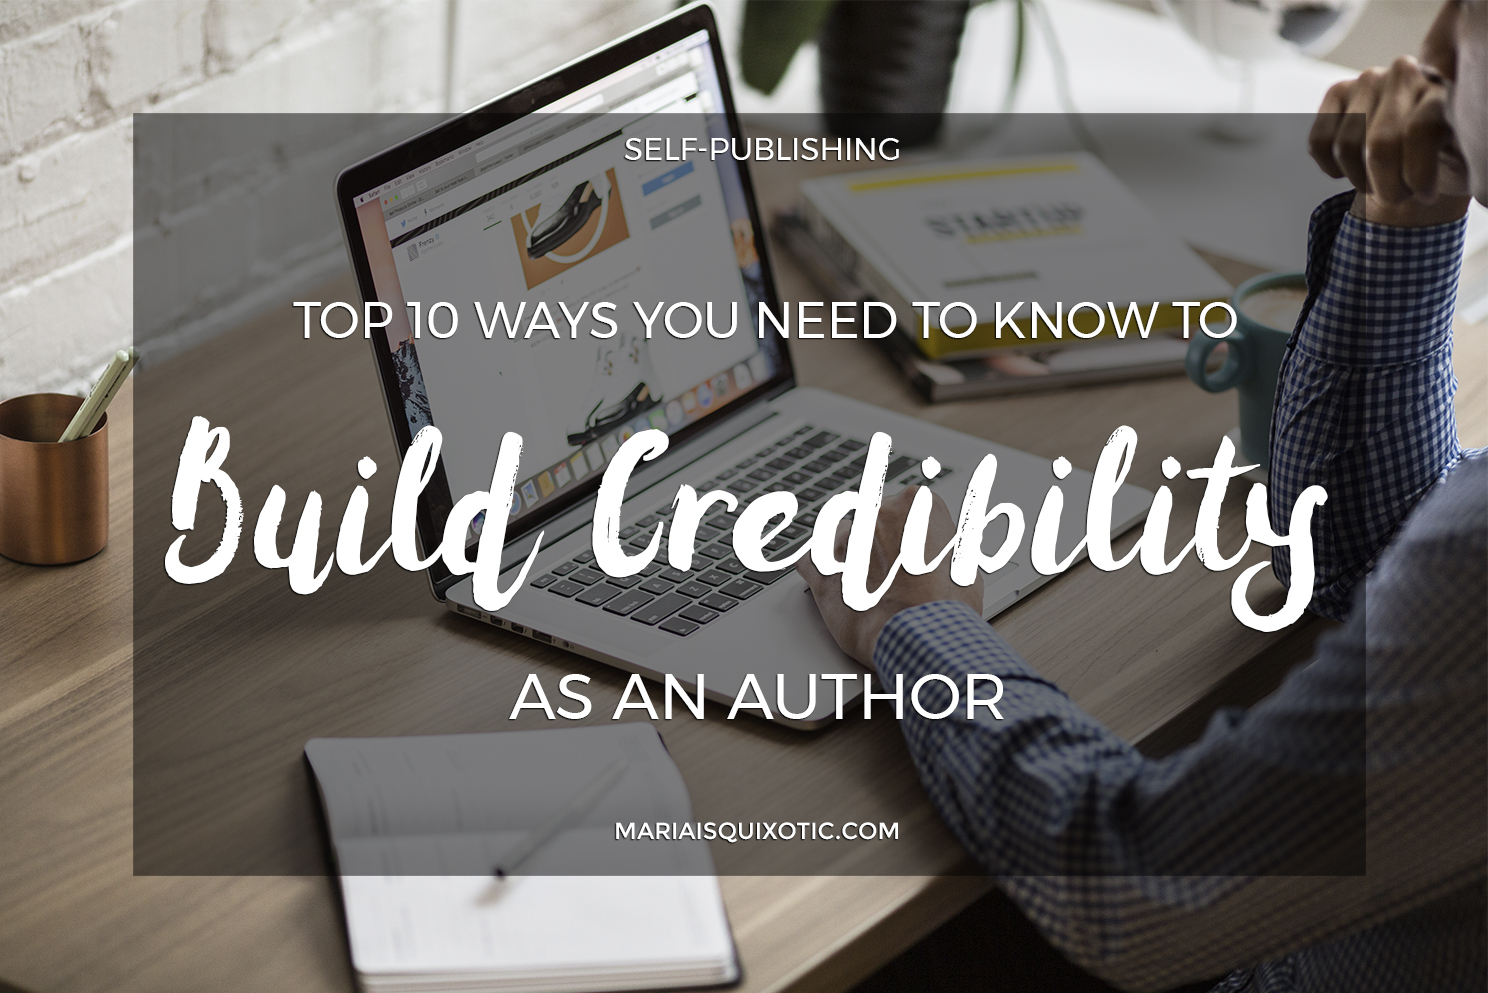 How will You Build Credibility as an Author?